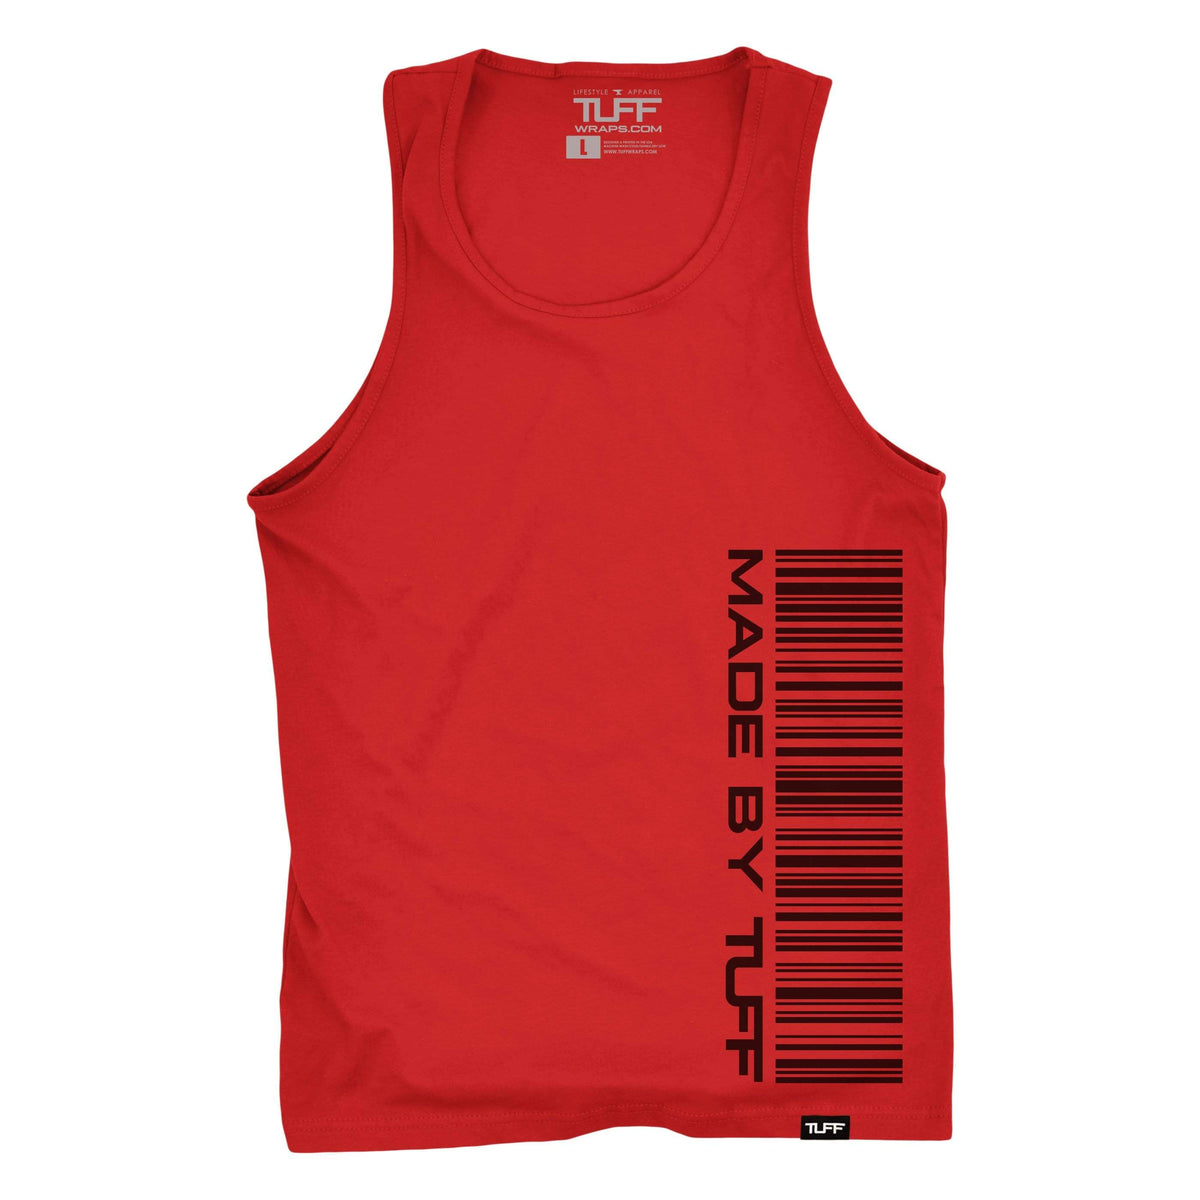 The Barcode Tank S / Red TuffWraps.com